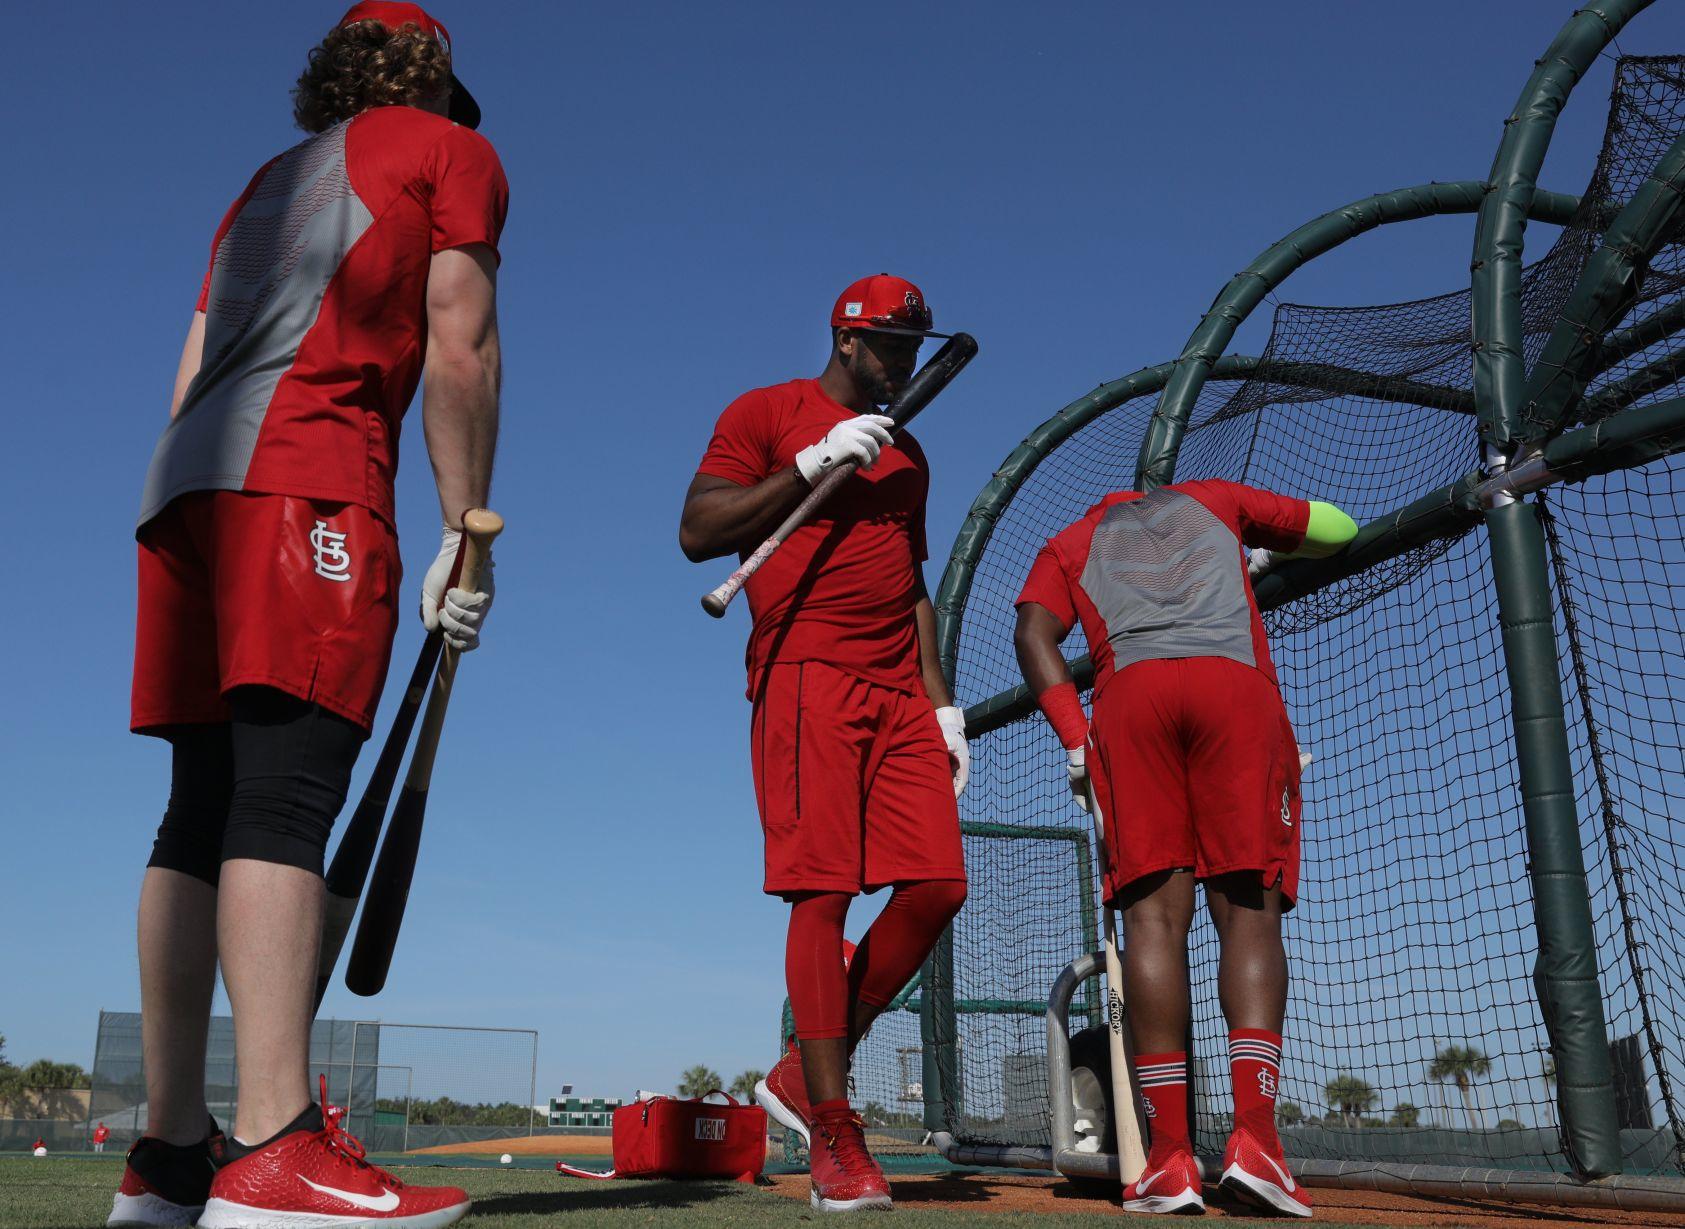 Cardinals spring training continues